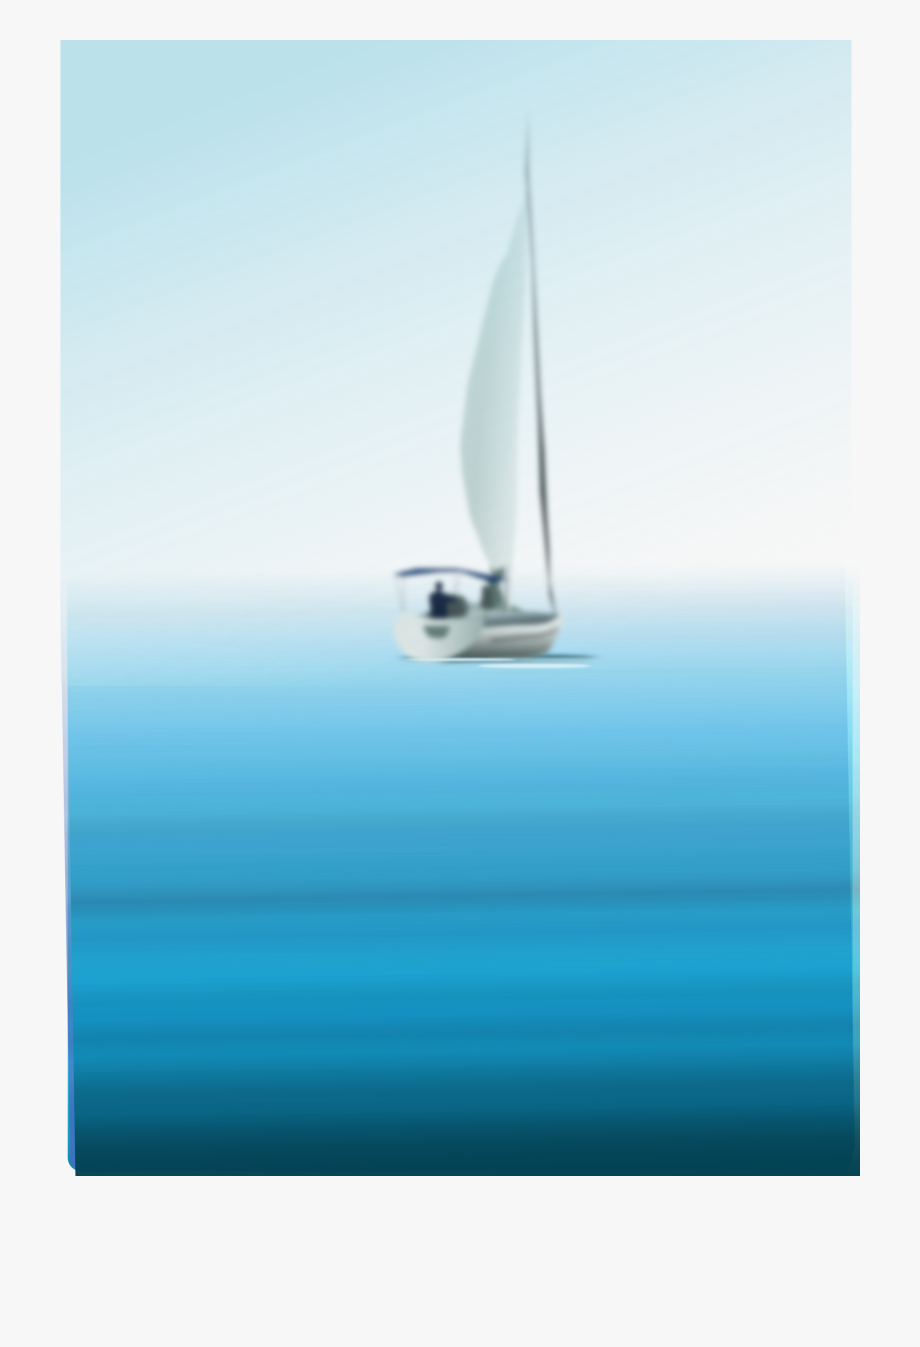 Png Freeuse Yacht Clipart Large Boat.